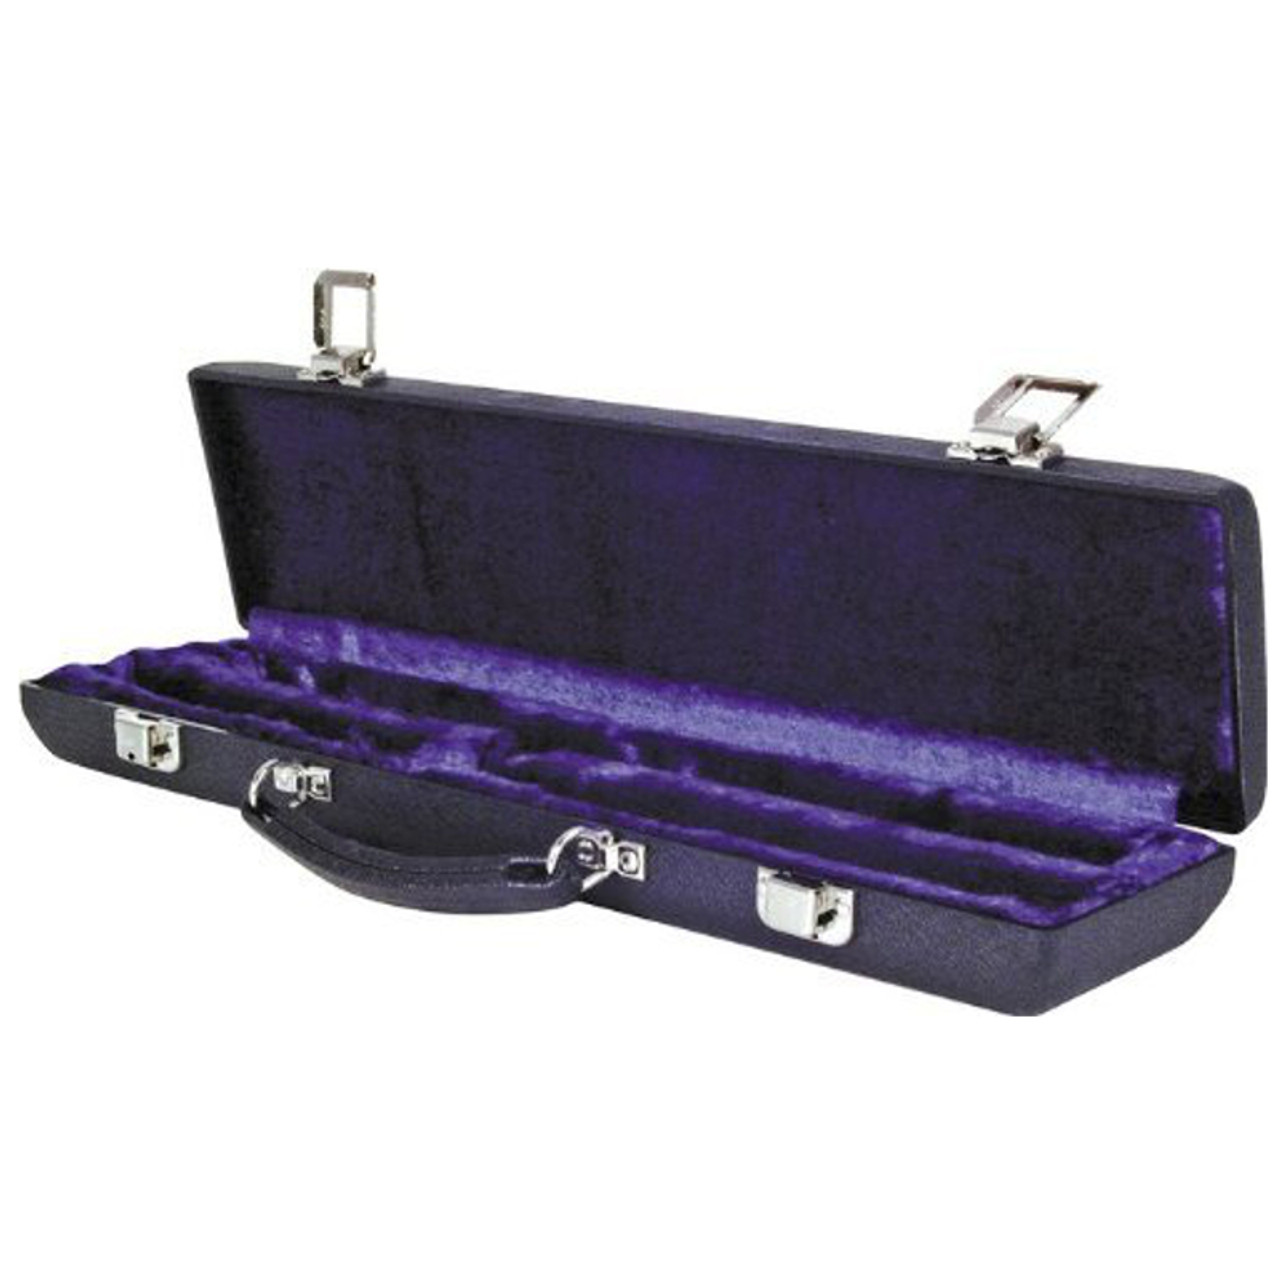 MTS 810EB Foot Joint Flute Case 